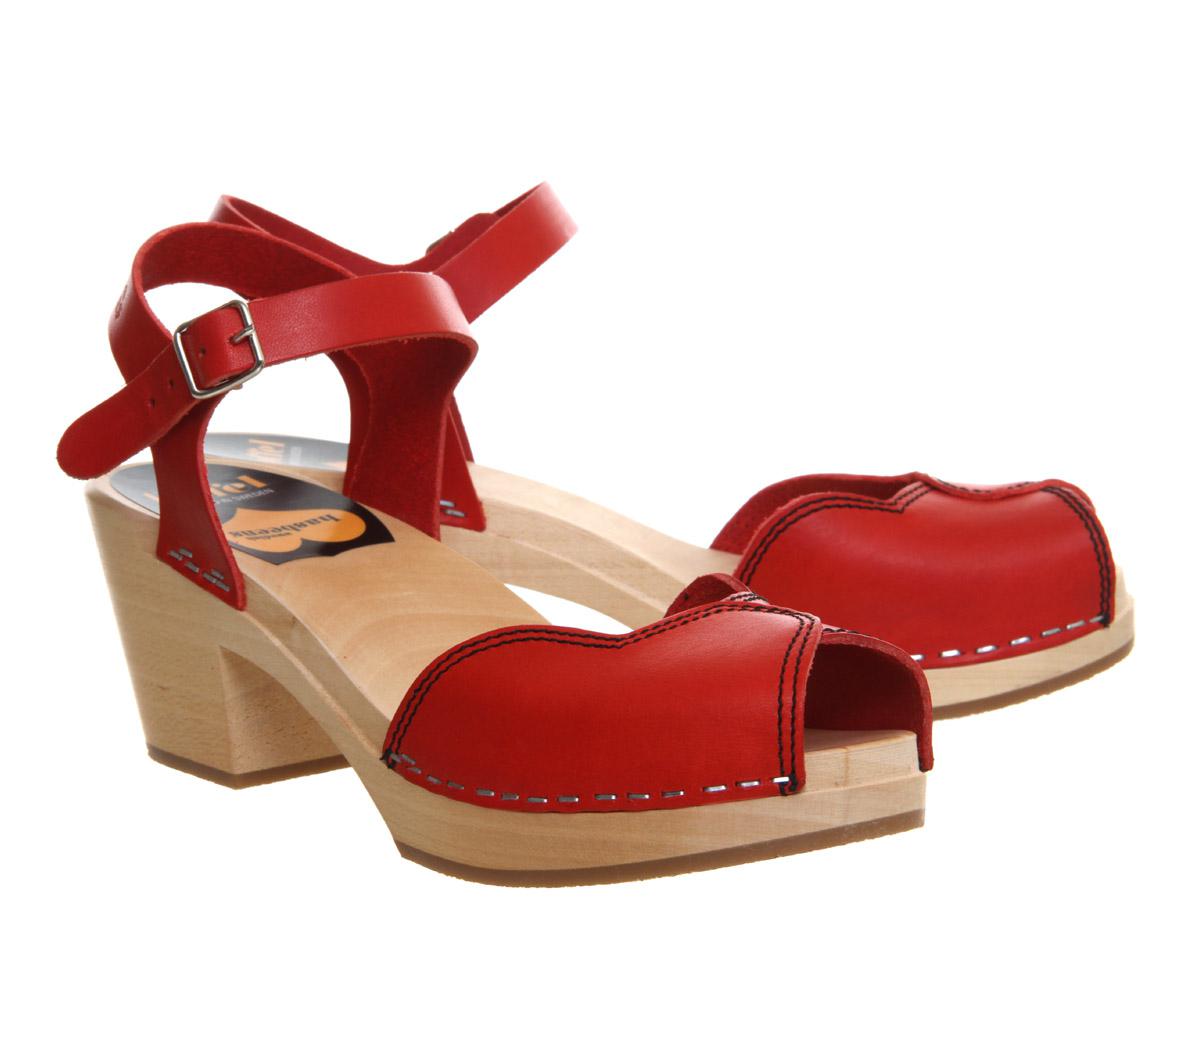 Lyst - Swedish Hasbeens Heart High Sandals in Red